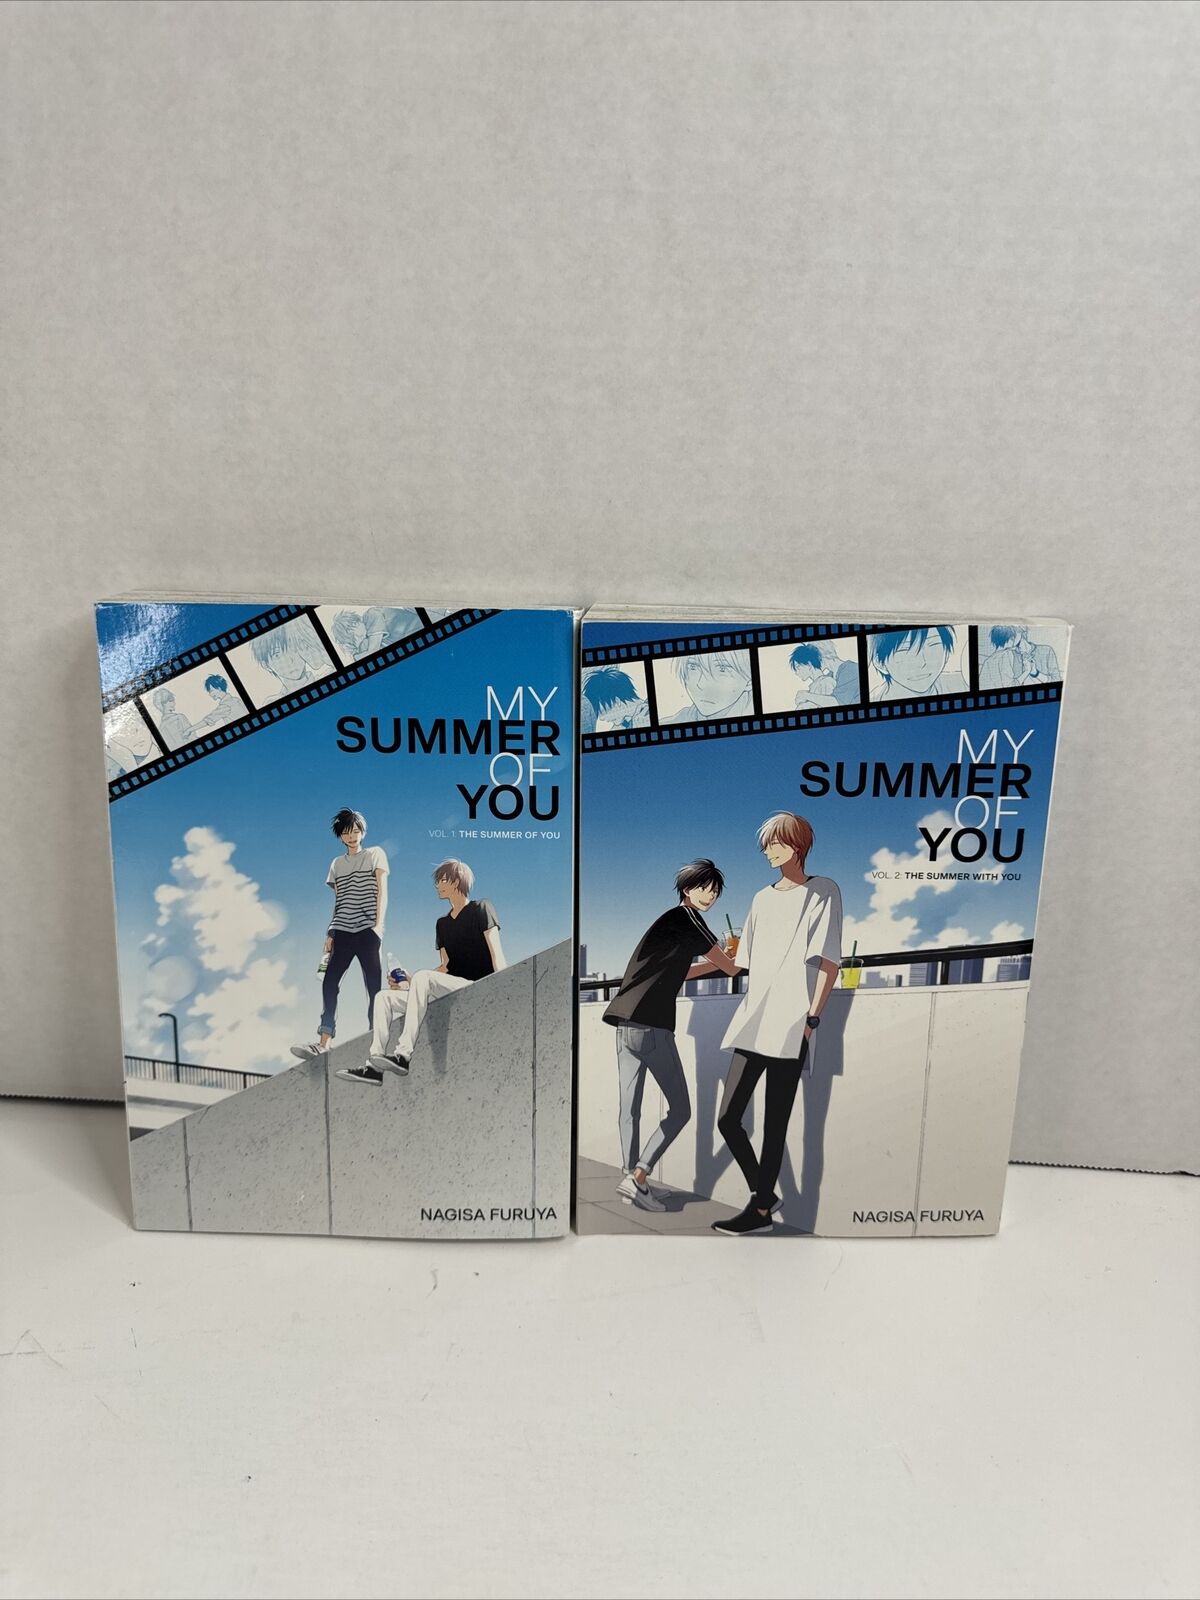 My Summer of You Mangas Volumes 1 & 2 English Good Condition Manga complete